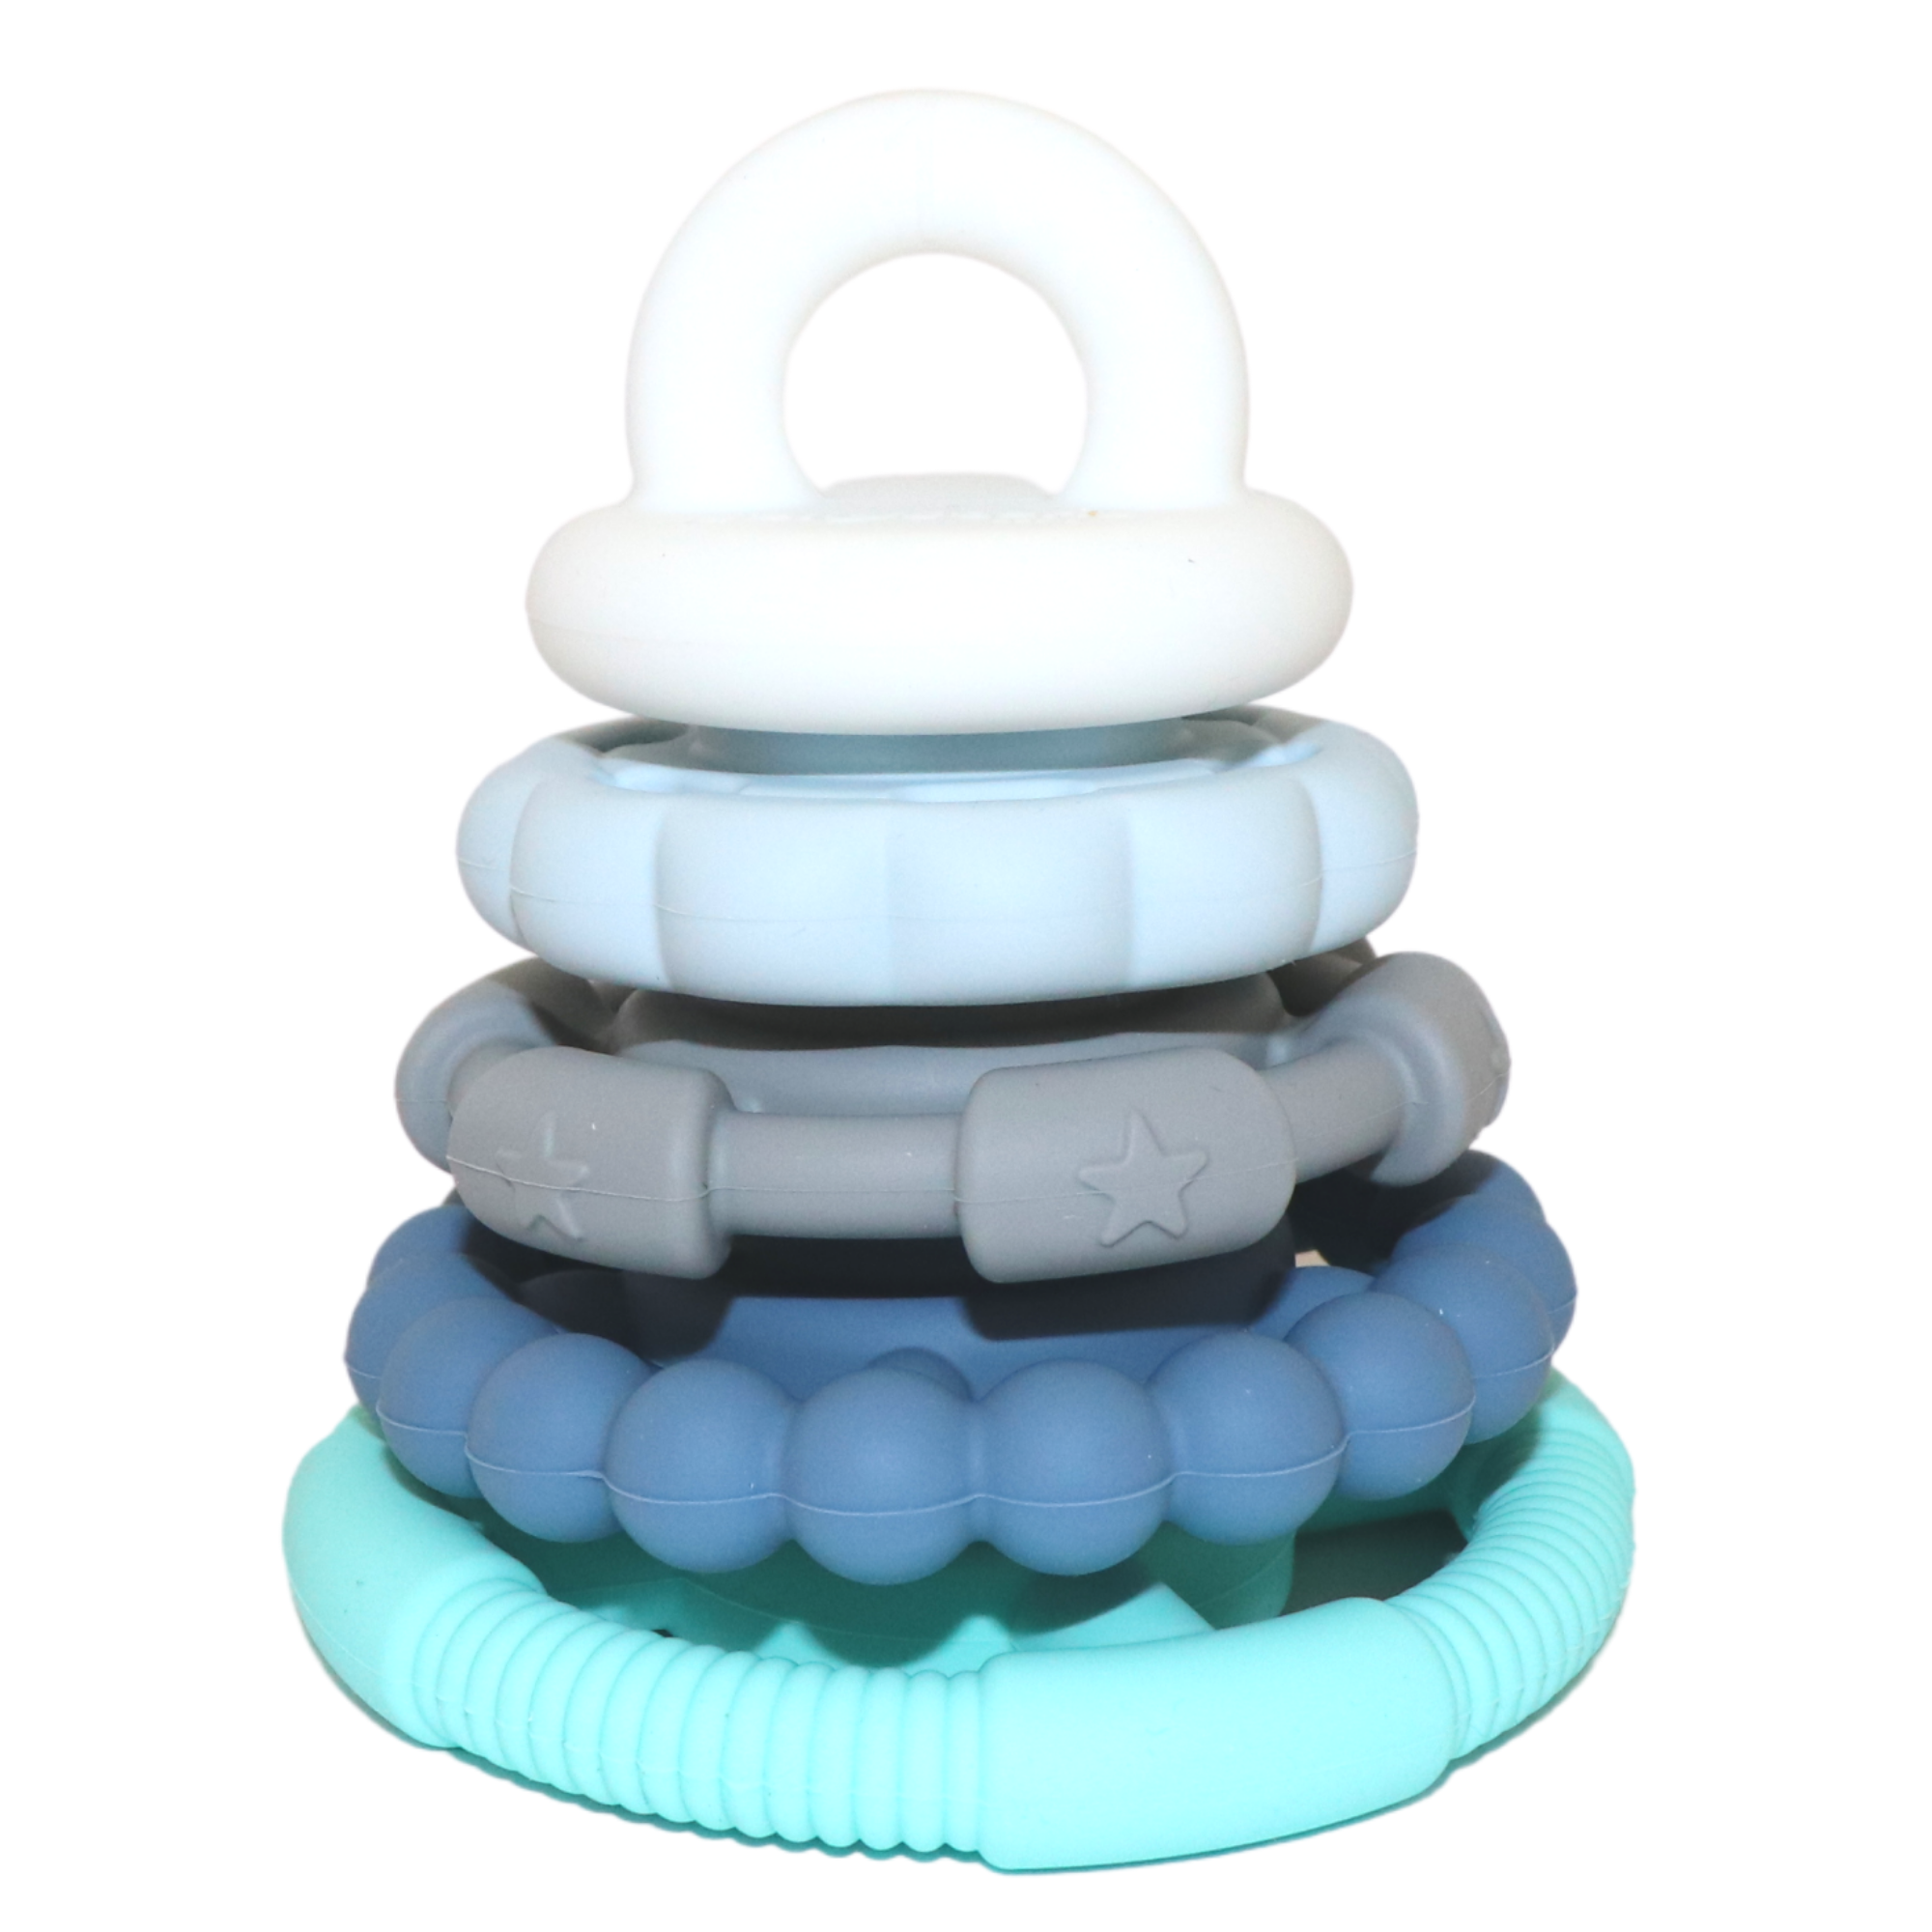 CLEARANCE AS-IS Jellystone Rainbow Stacker and Teether Toy - OCEAN